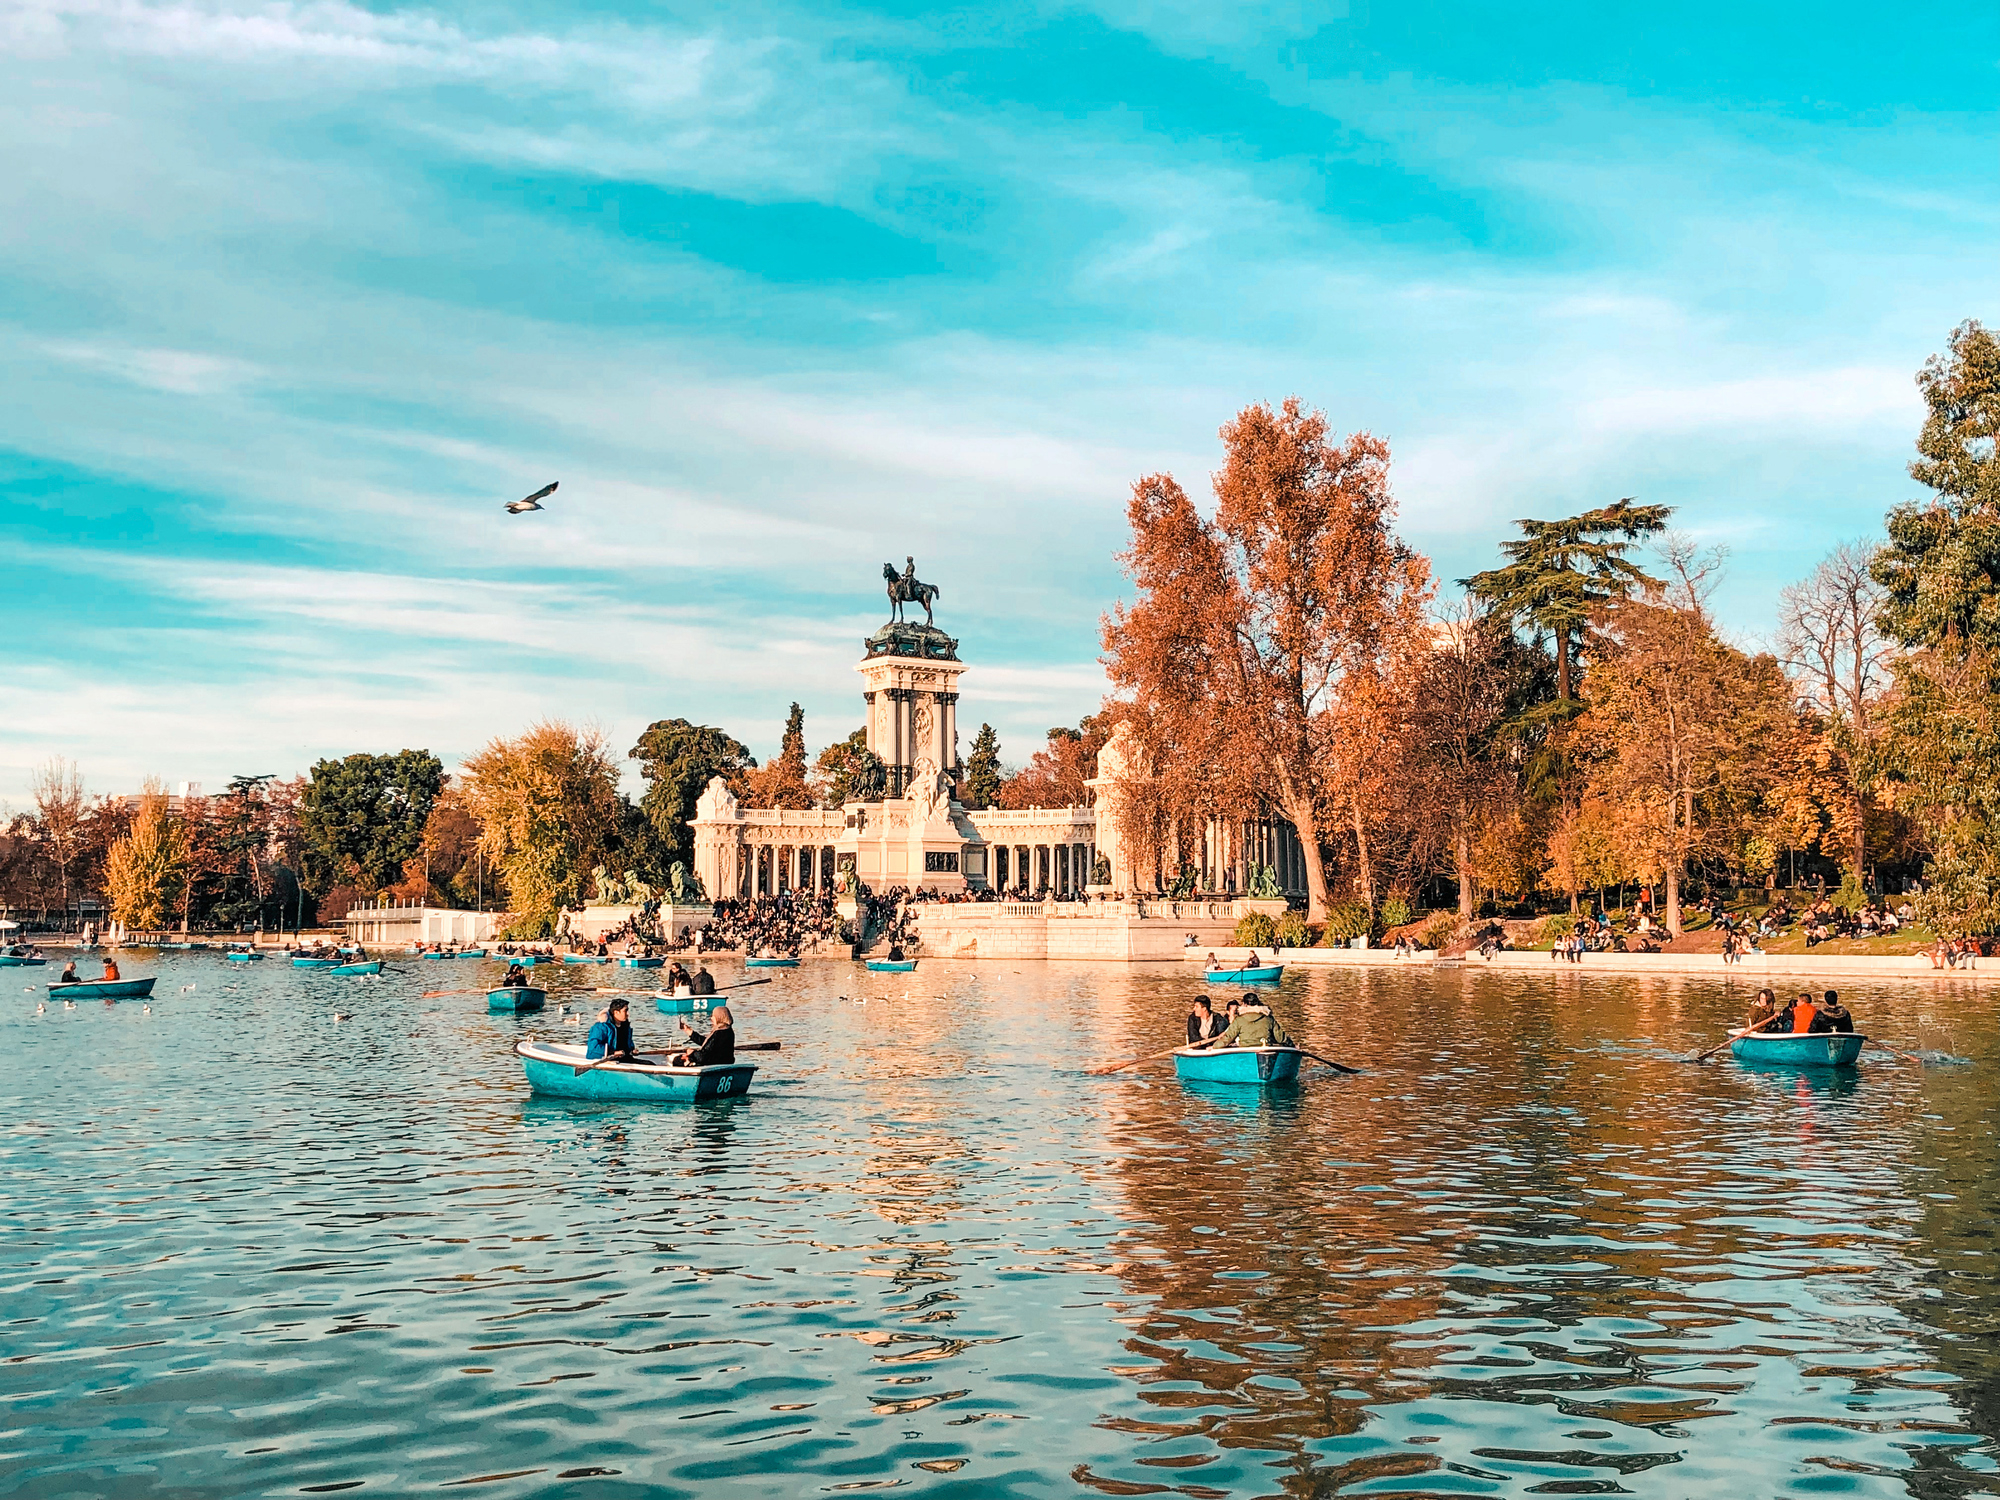 People rowing boats on a park lake with a monument in the background. Bird flying overhead